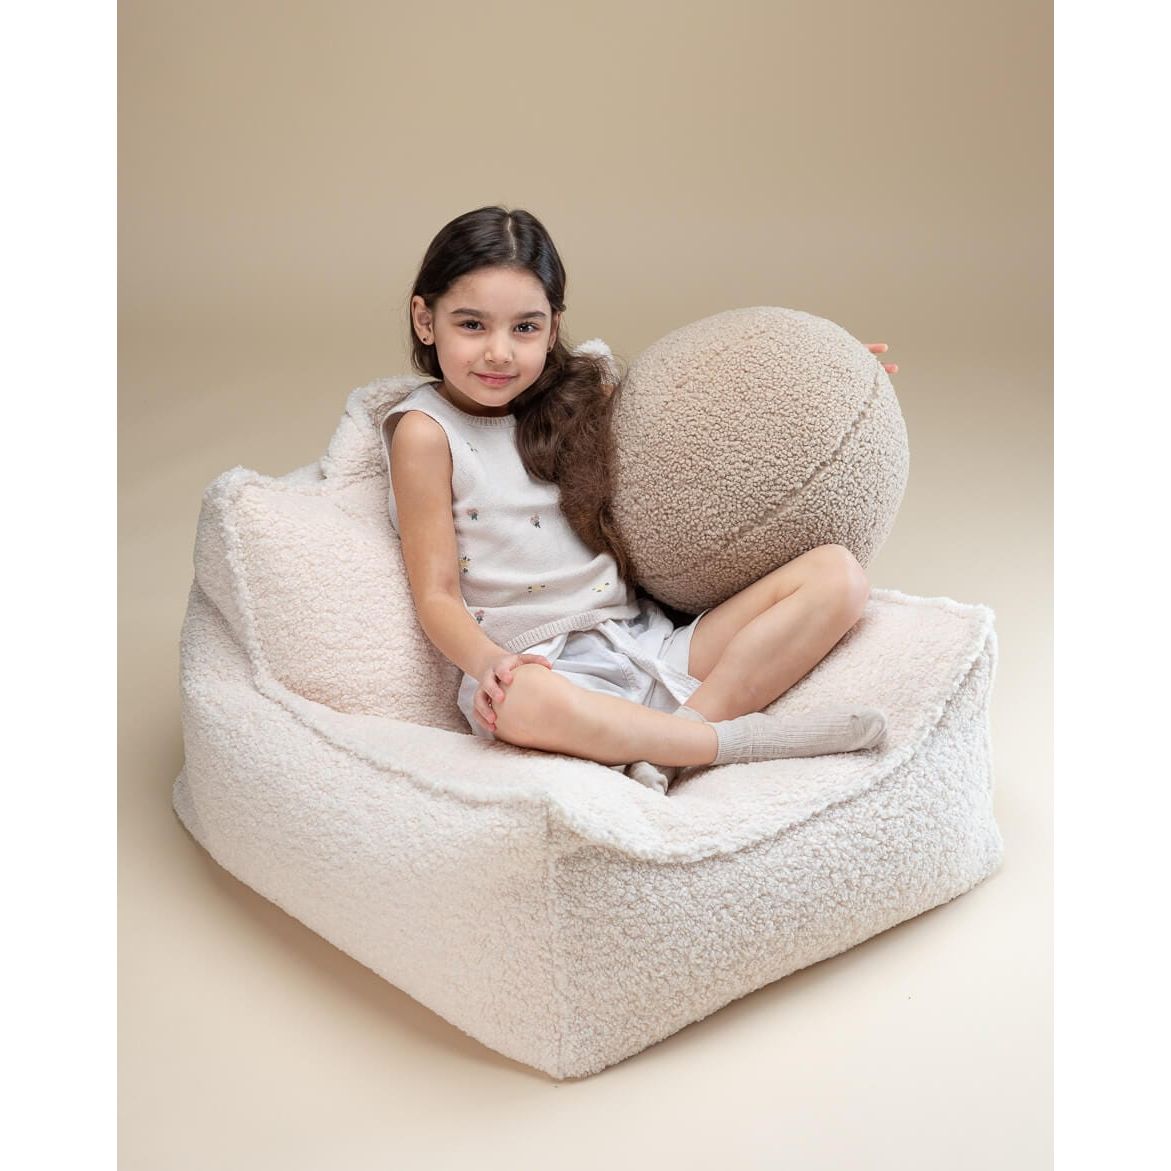 girl leaning back in beanbag chair holding Wigiwama Biscuit Ball Cushion